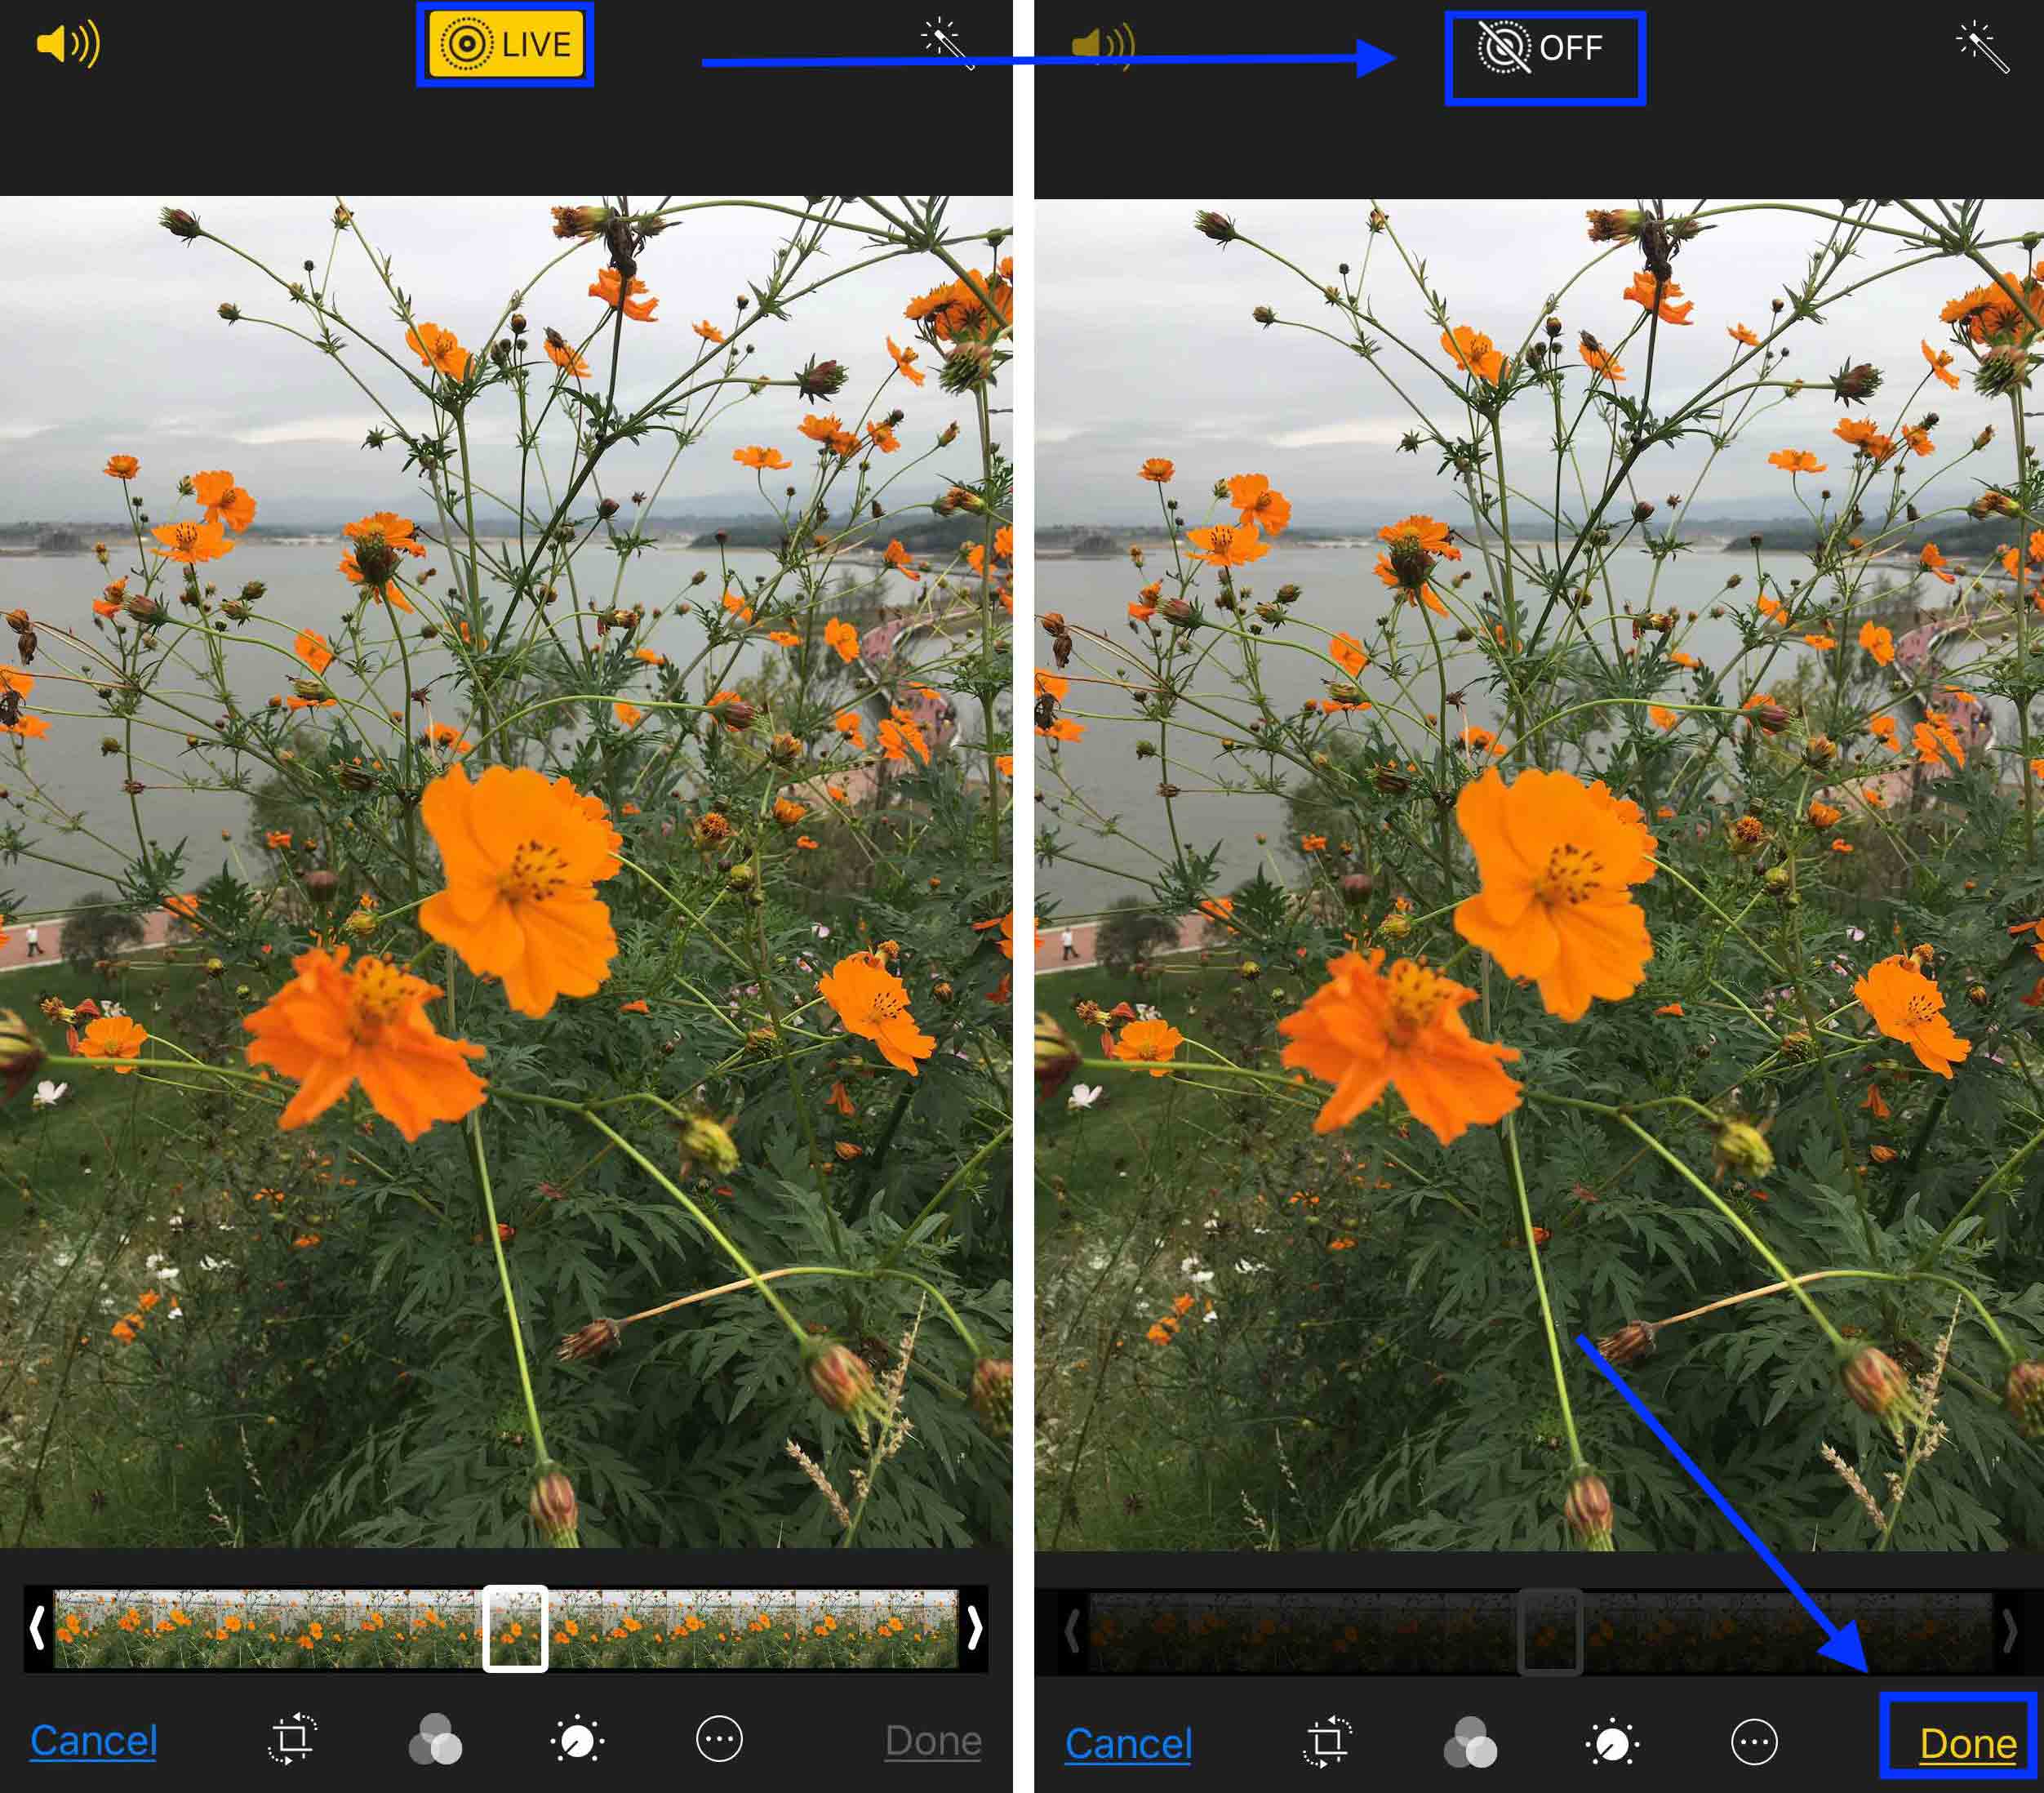 Convert Live Photo to Still by Photo Editing - Step 2